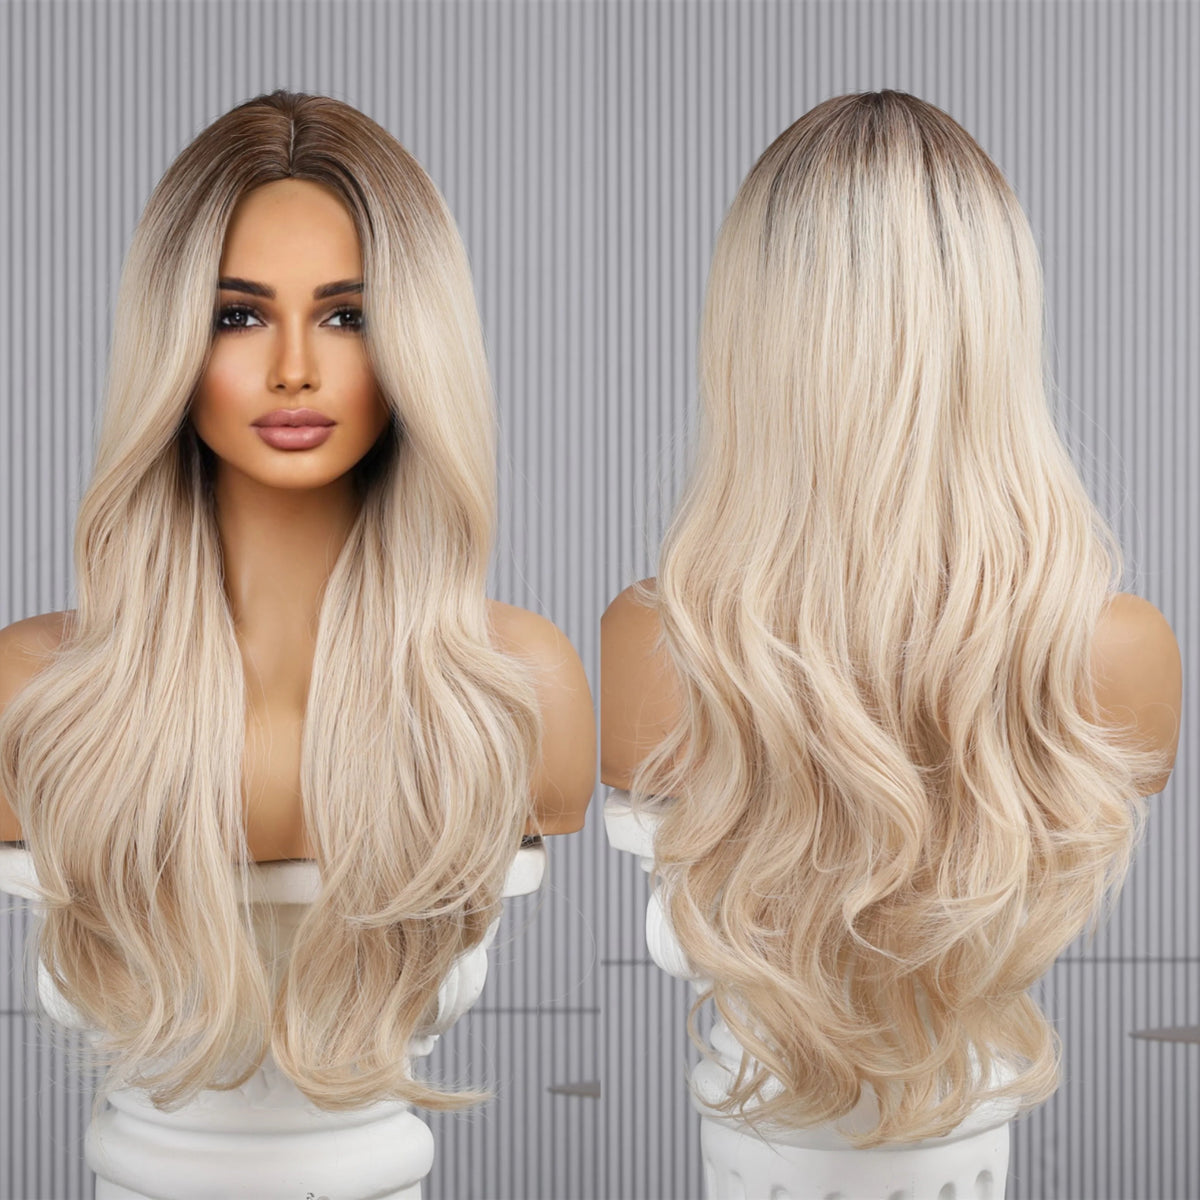 Long Wavy Ombre BrownS Synthetic Wigs - HairNjoy